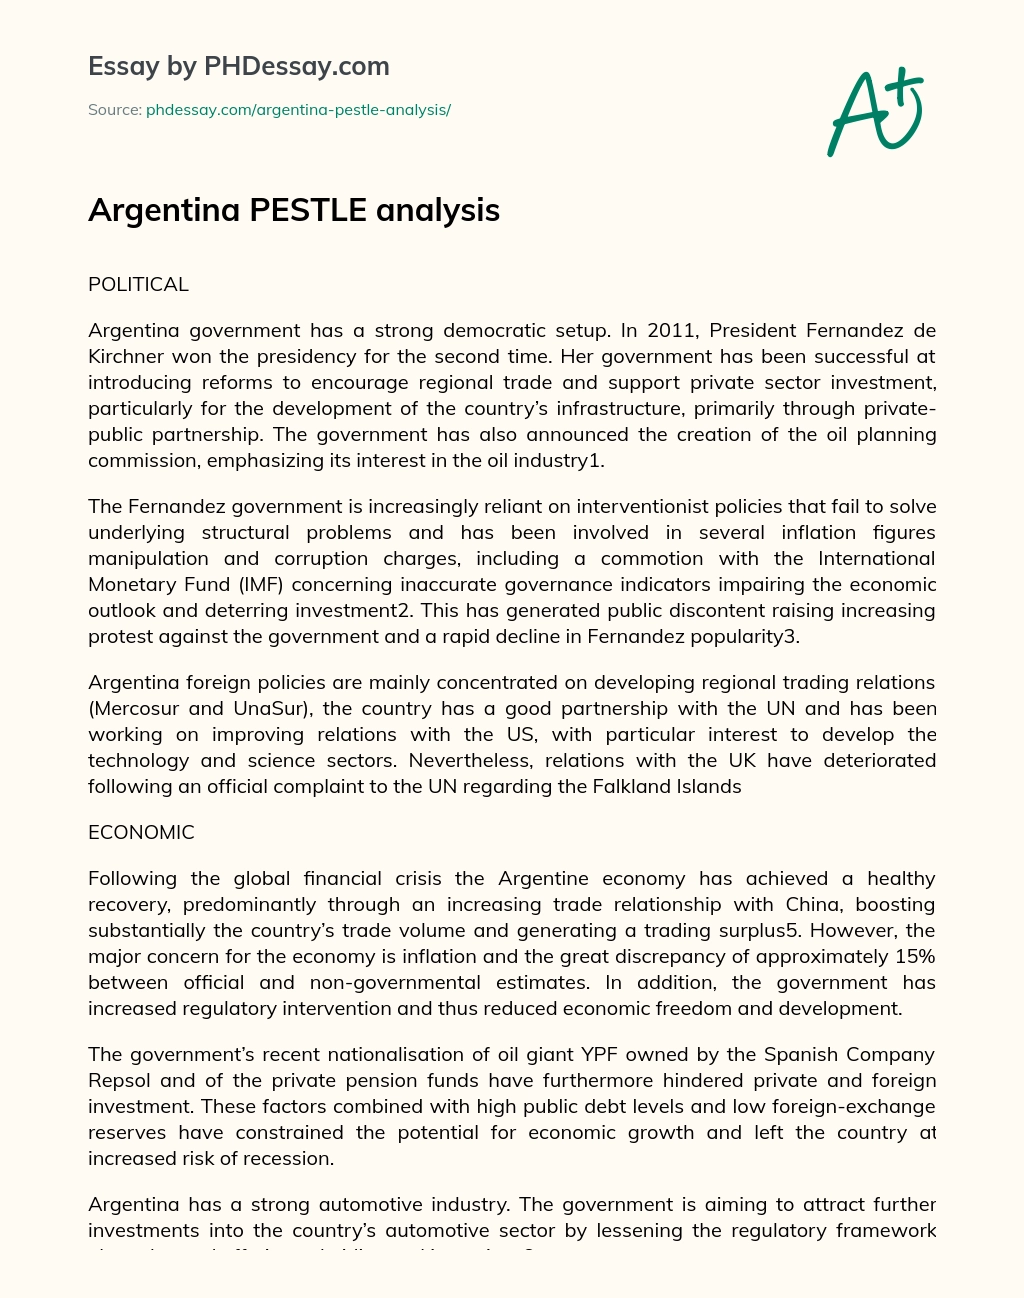 Overview of Argentina’s Government and Economic Situation essay